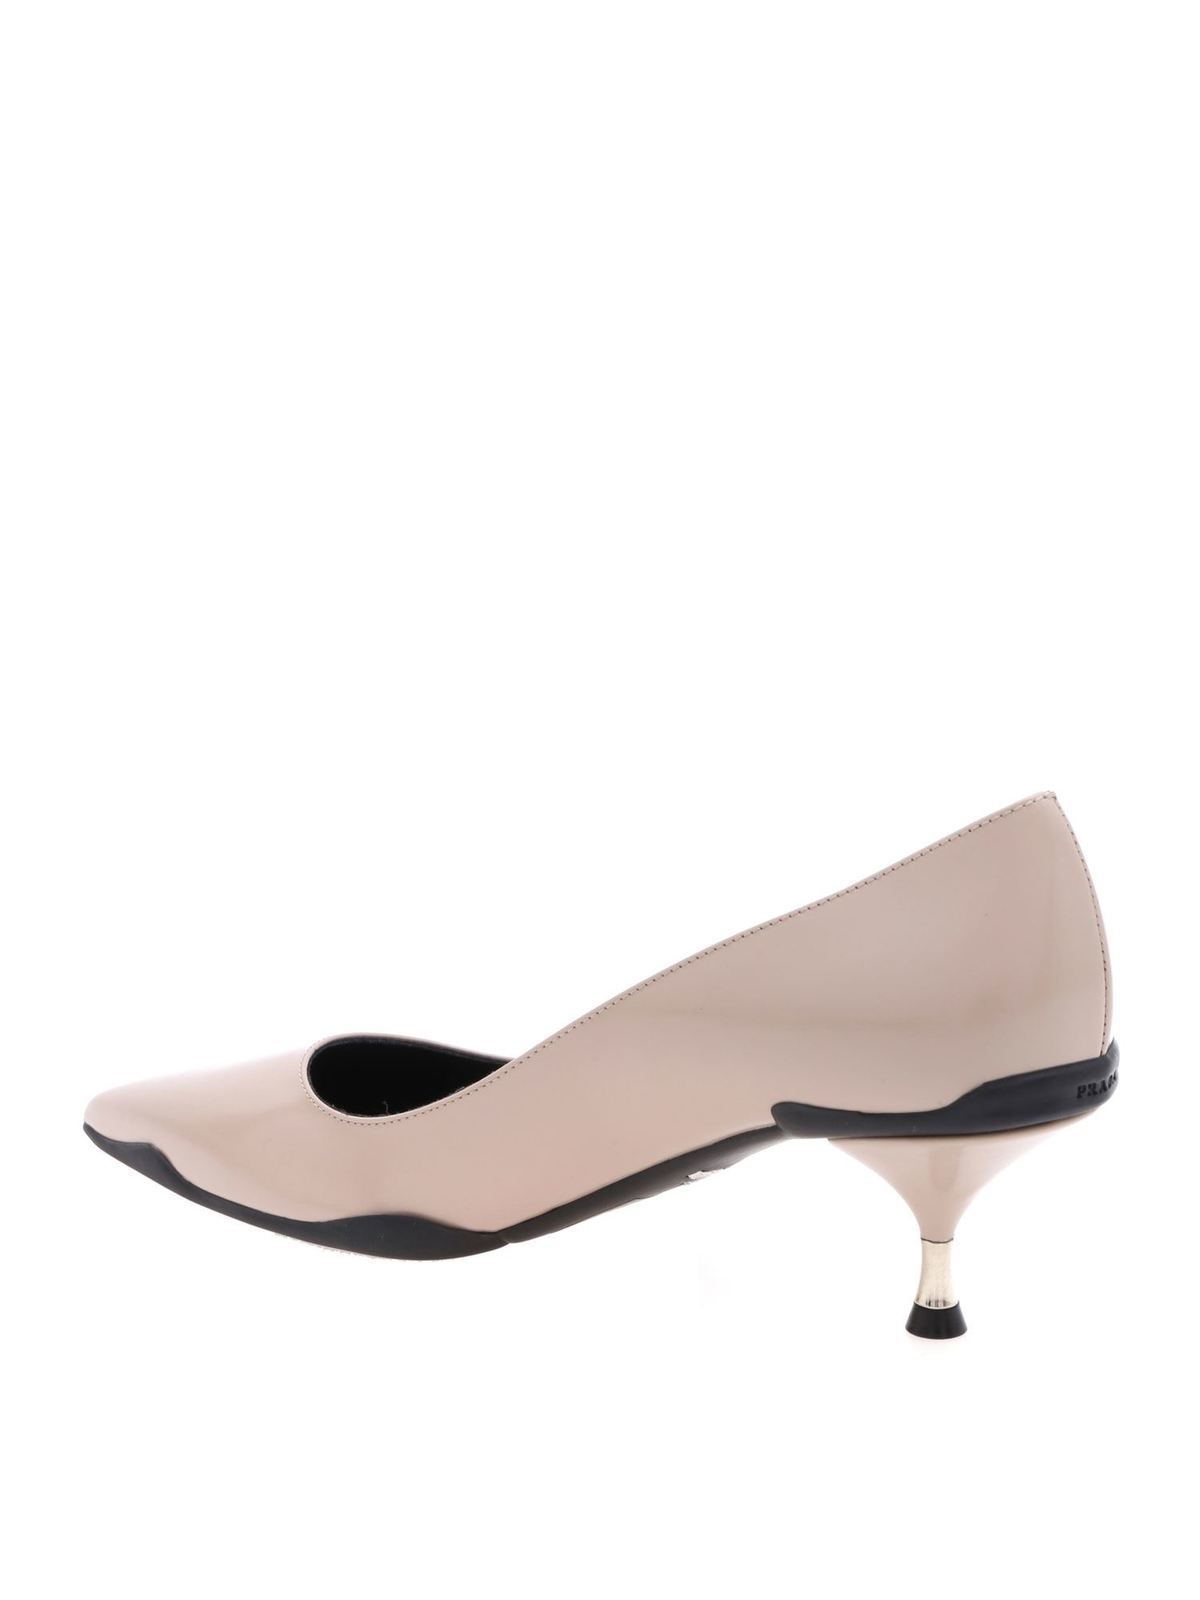 Court - pumps in powder pink leather - 1I262L055F0236